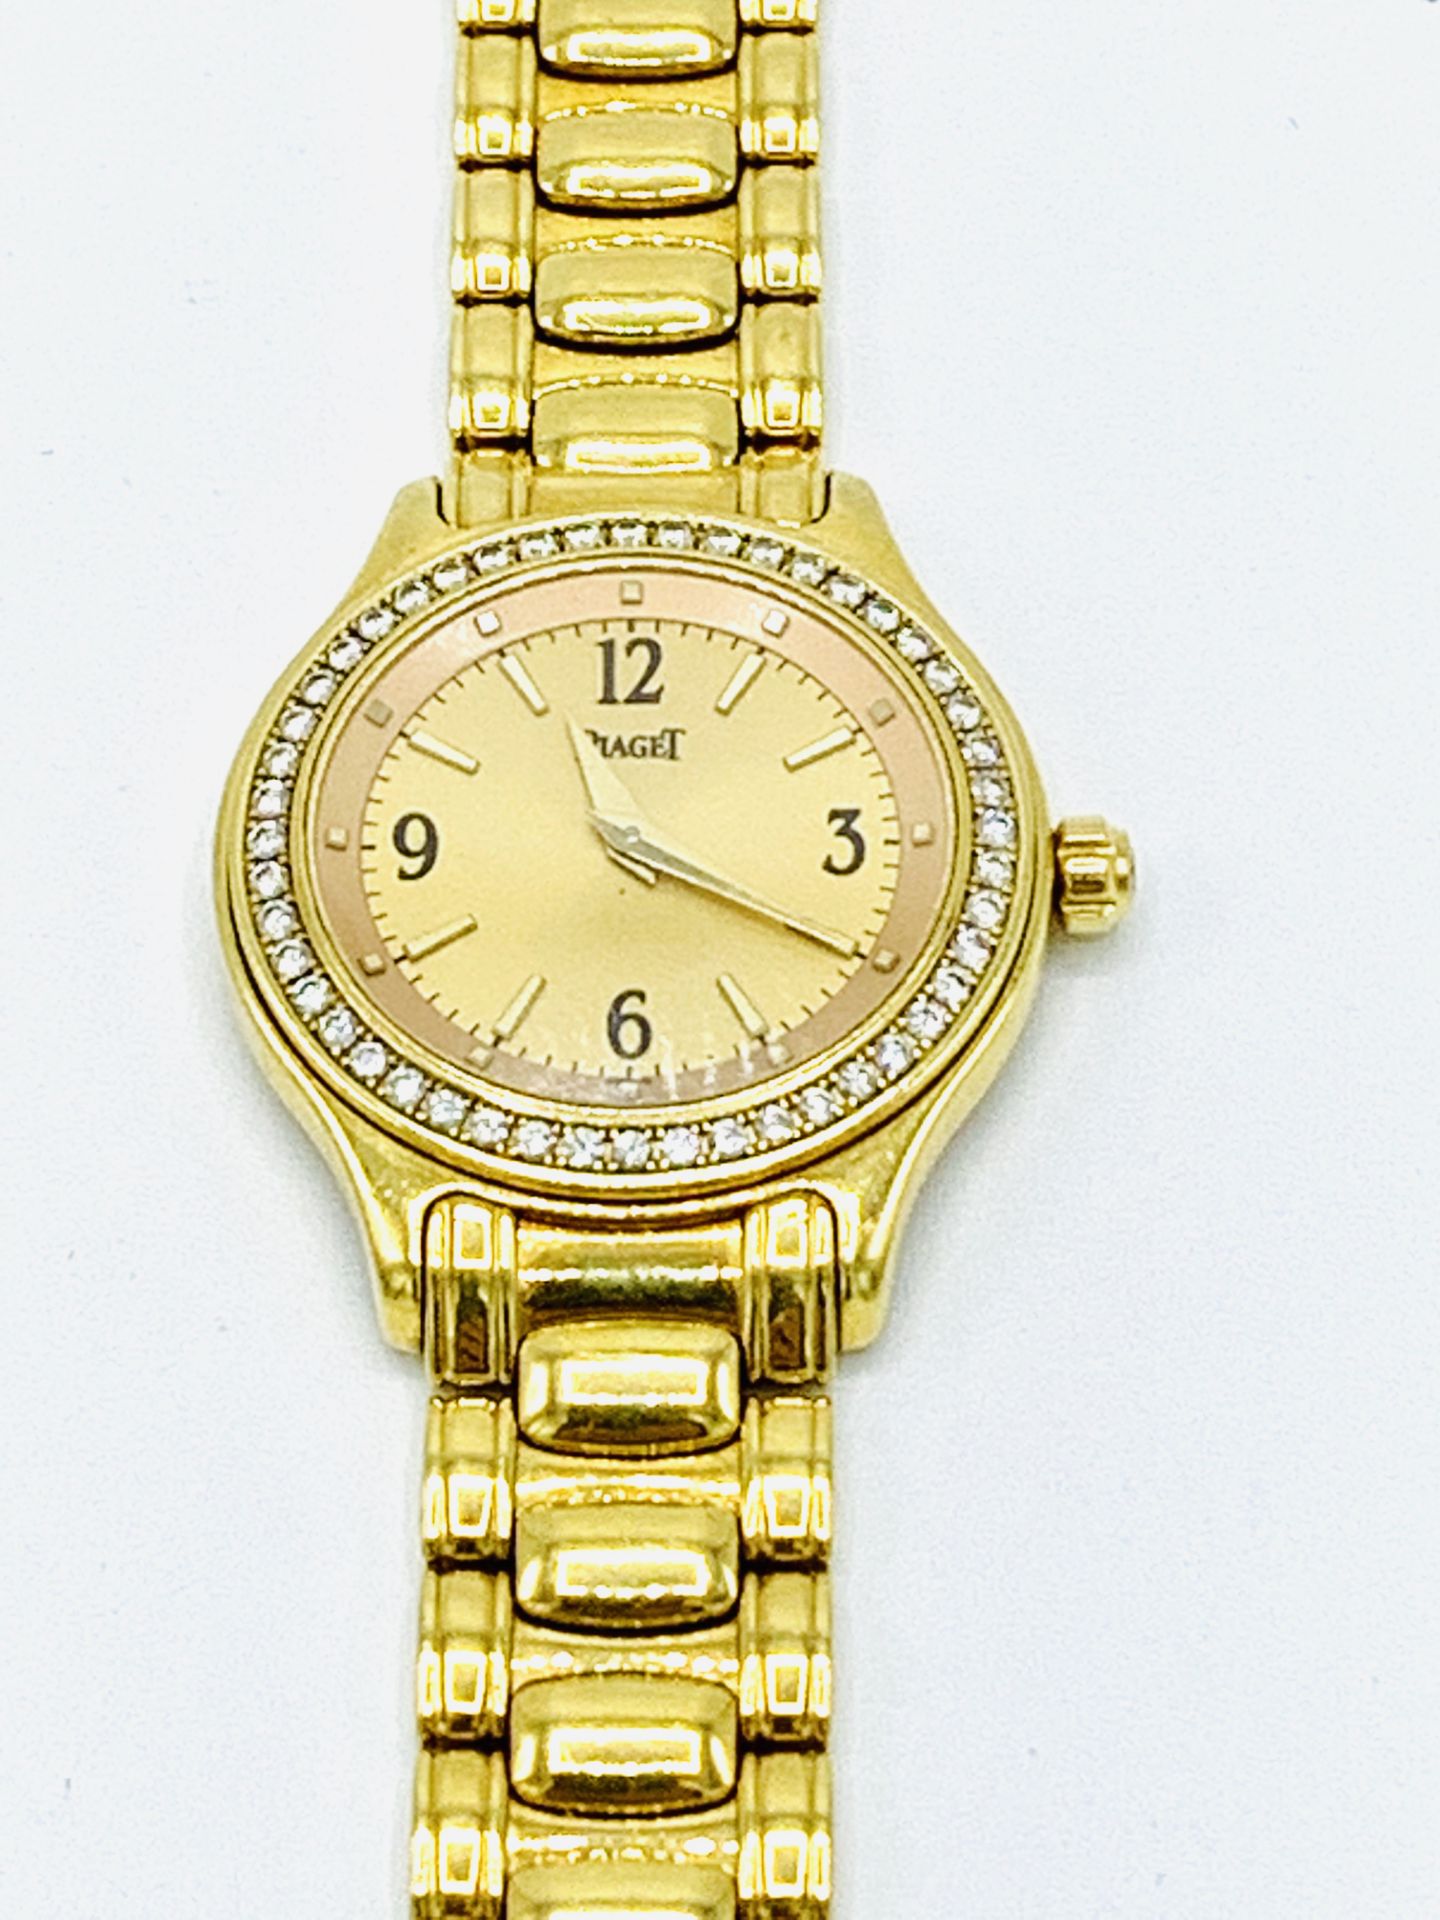 18ct gold cased Piaget watch. - Image 2 of 4